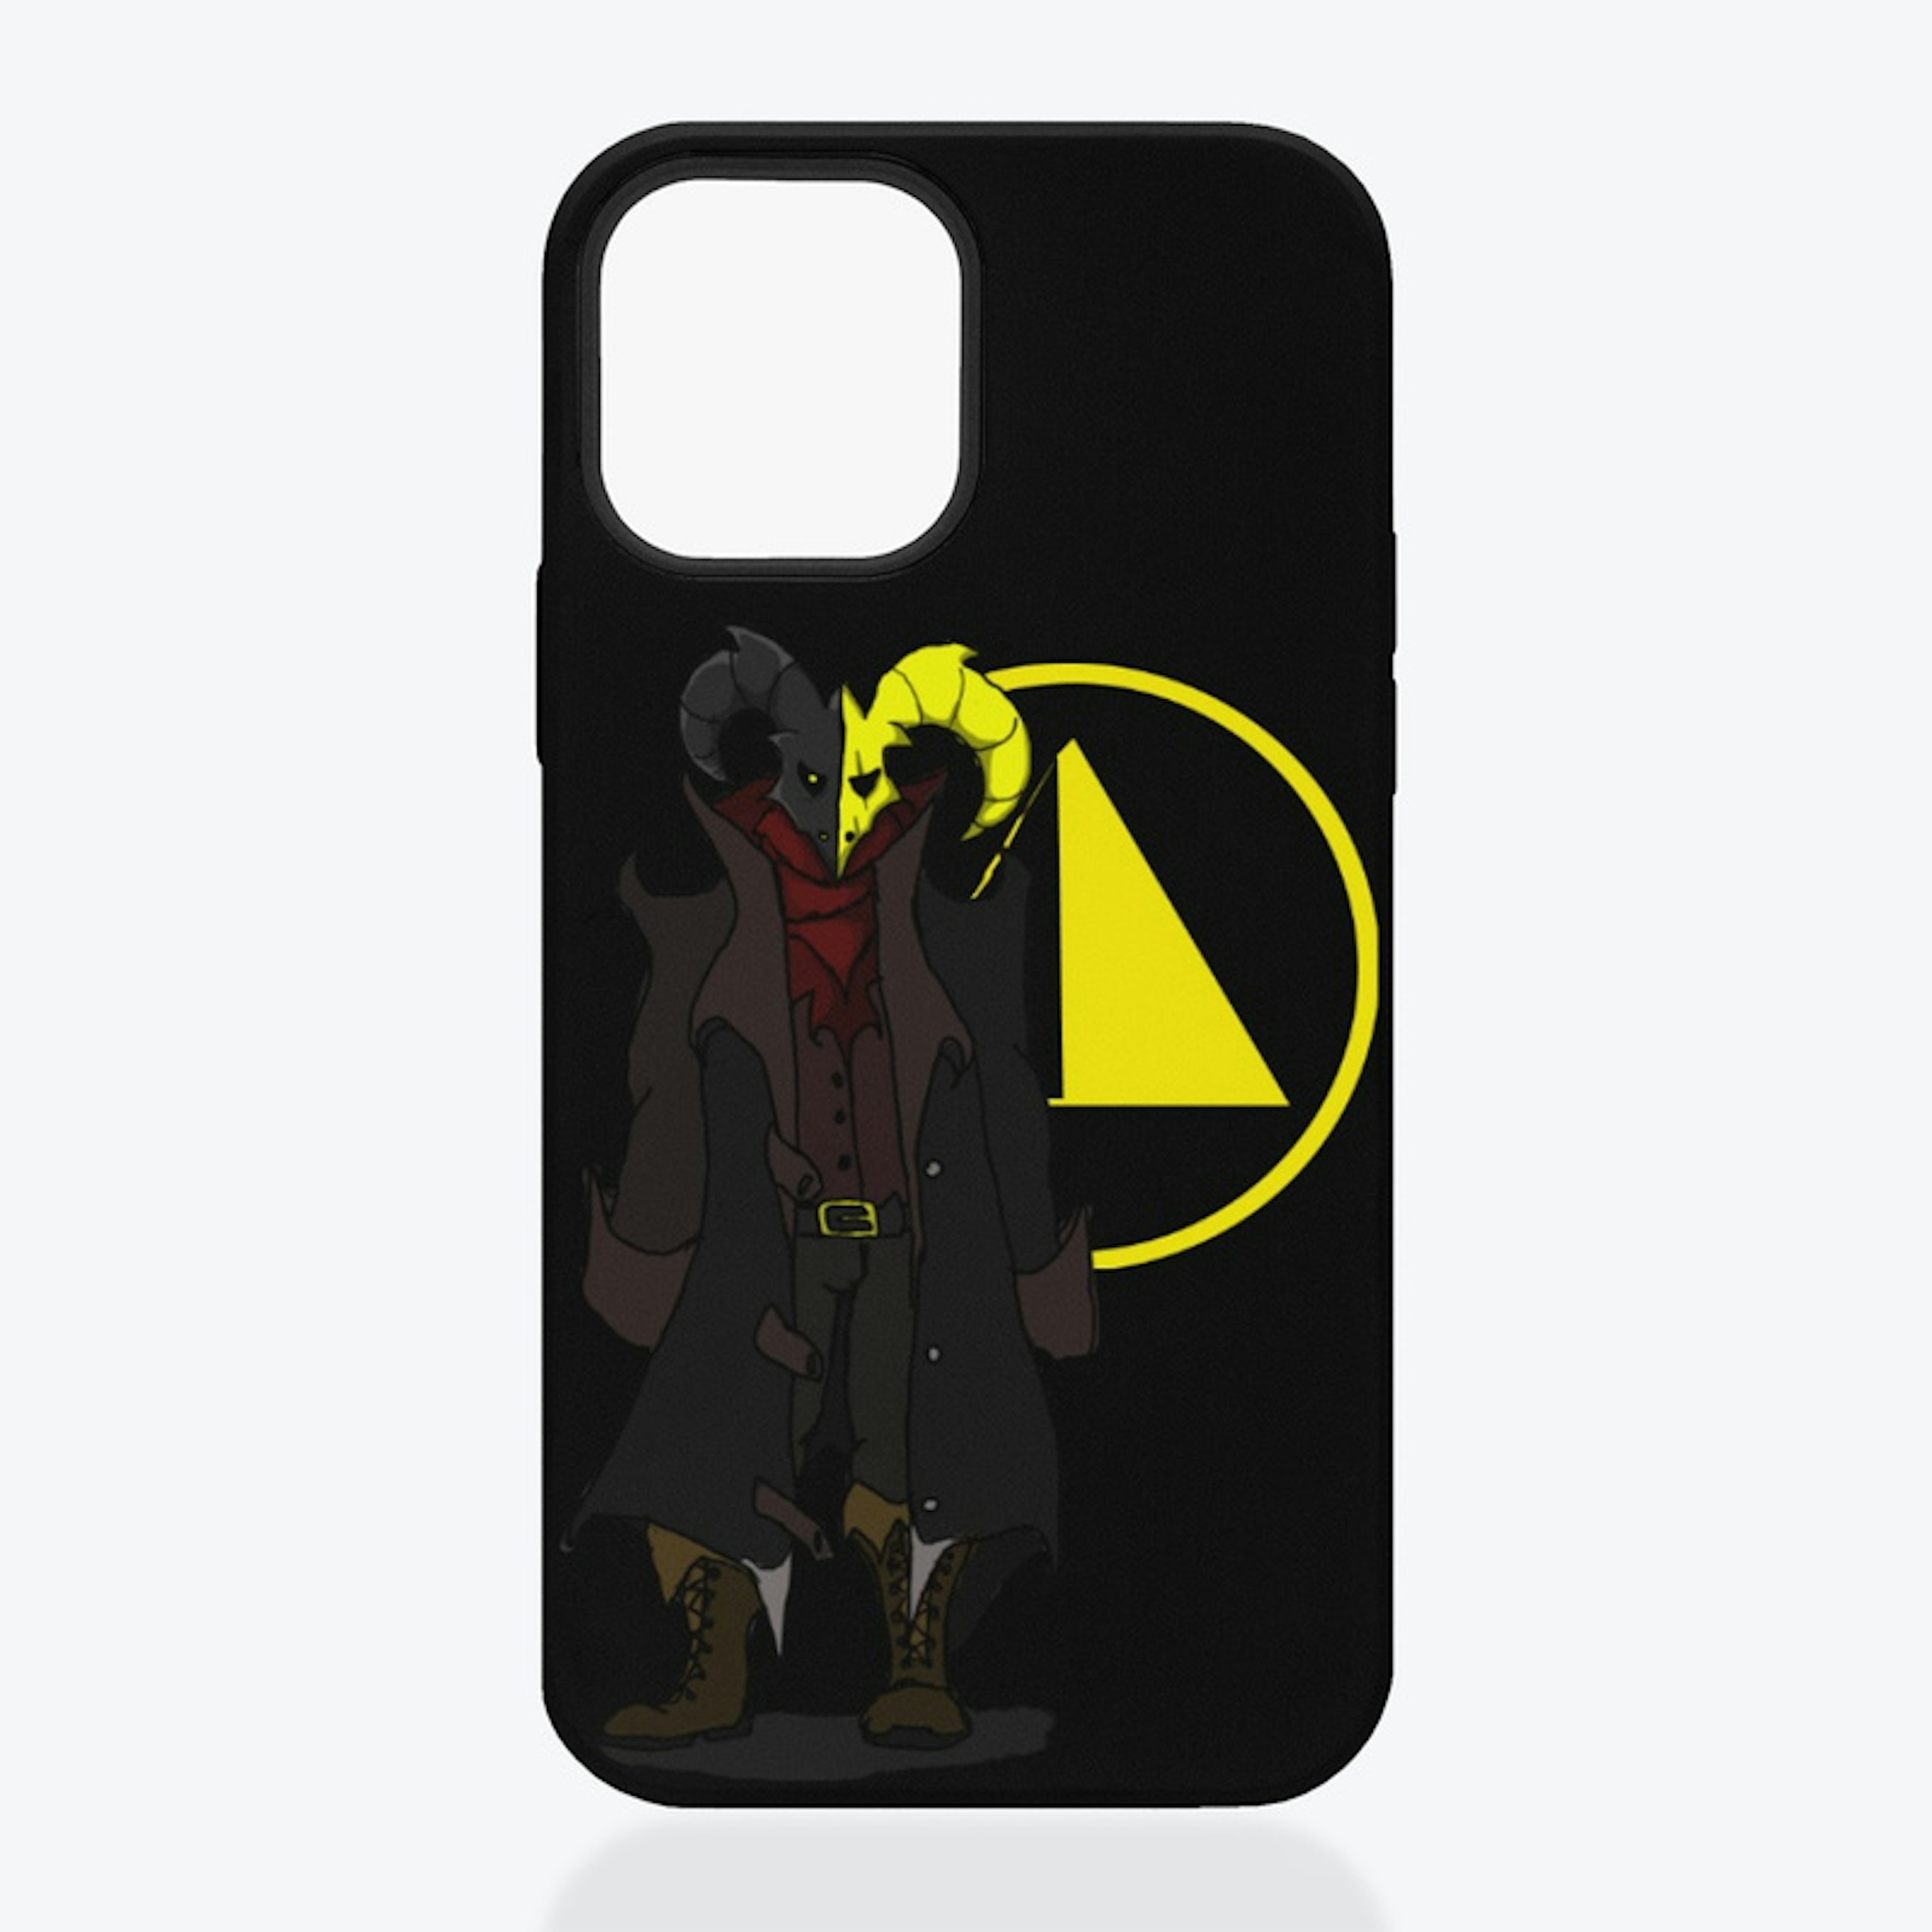 iPhone Reaper Character Hard Case